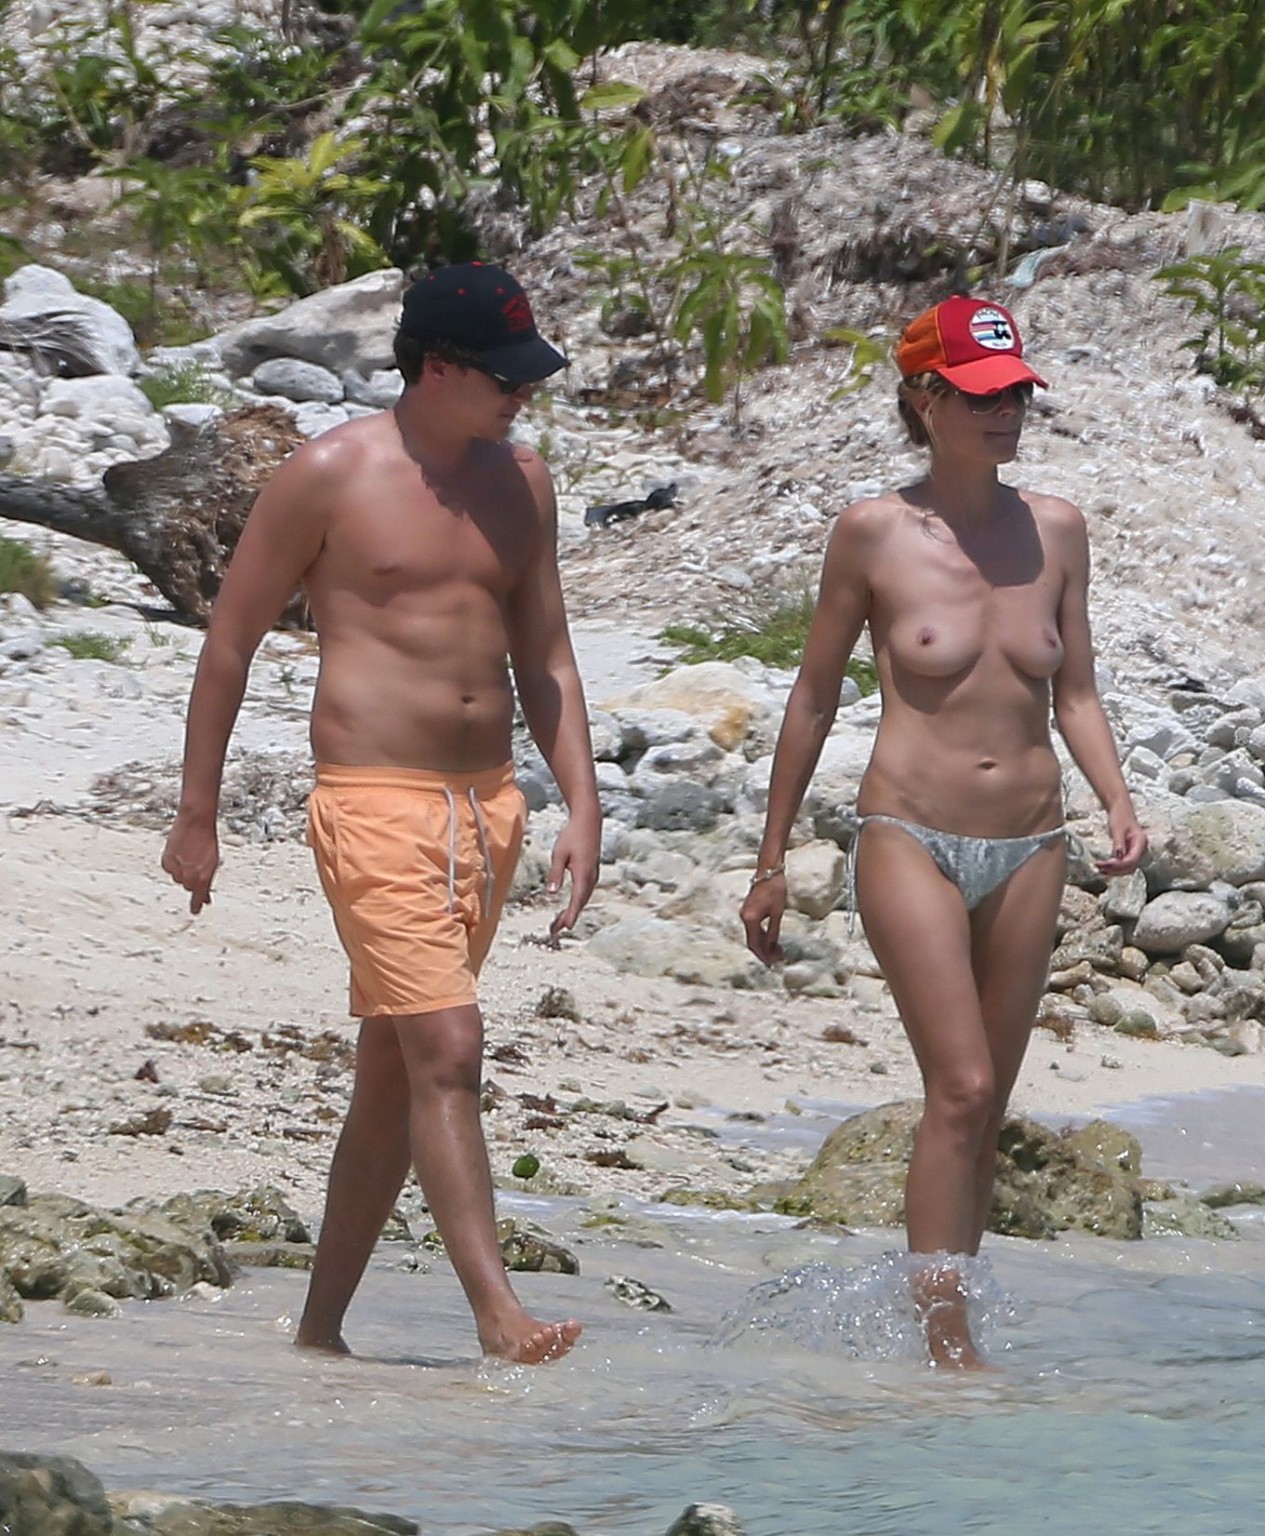 Heidi Klum teasing topless with her BF at the beach in Mexico #75199138